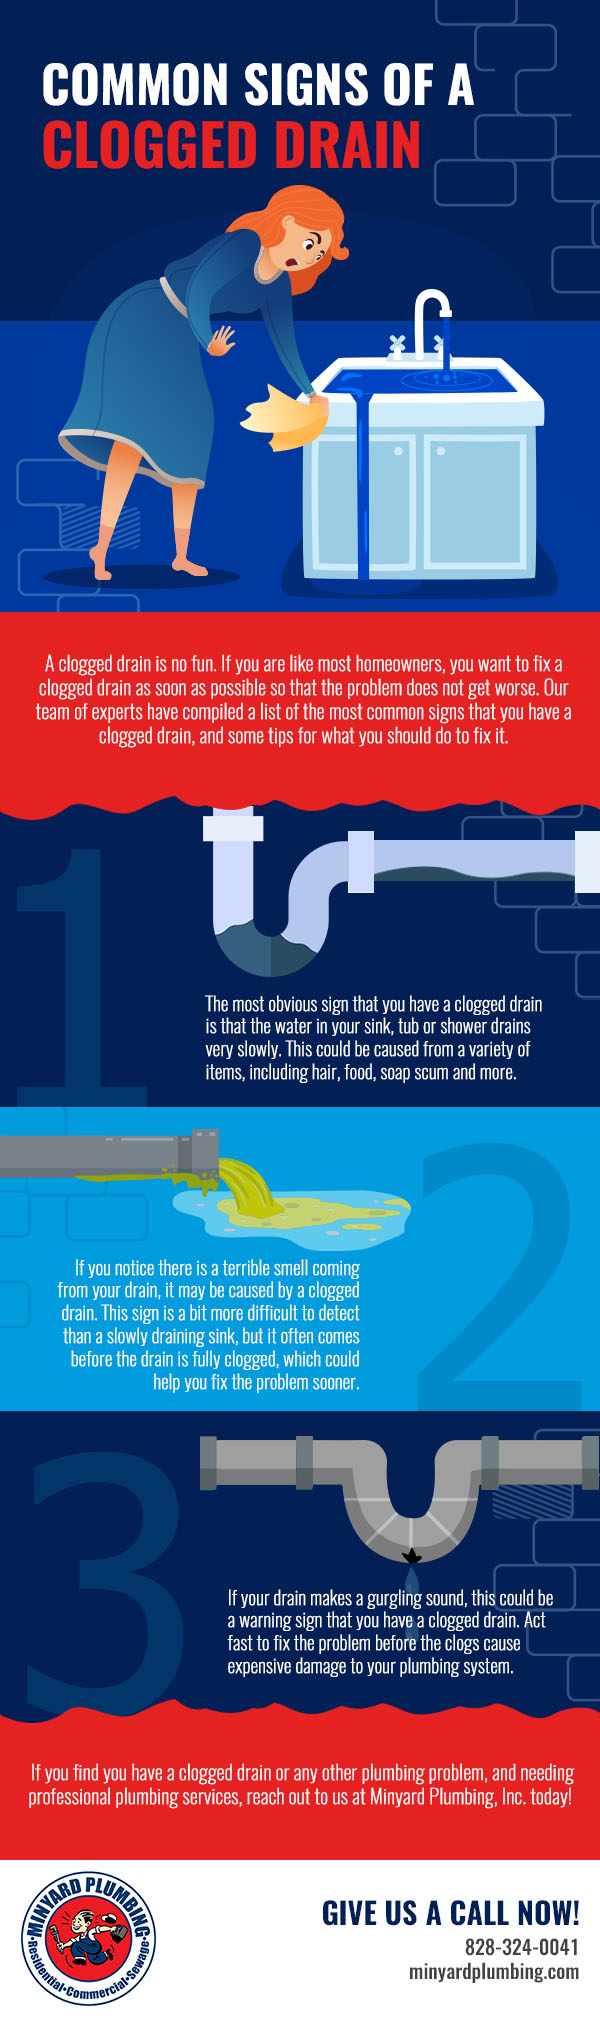 Common Signs of a Clogged Drain